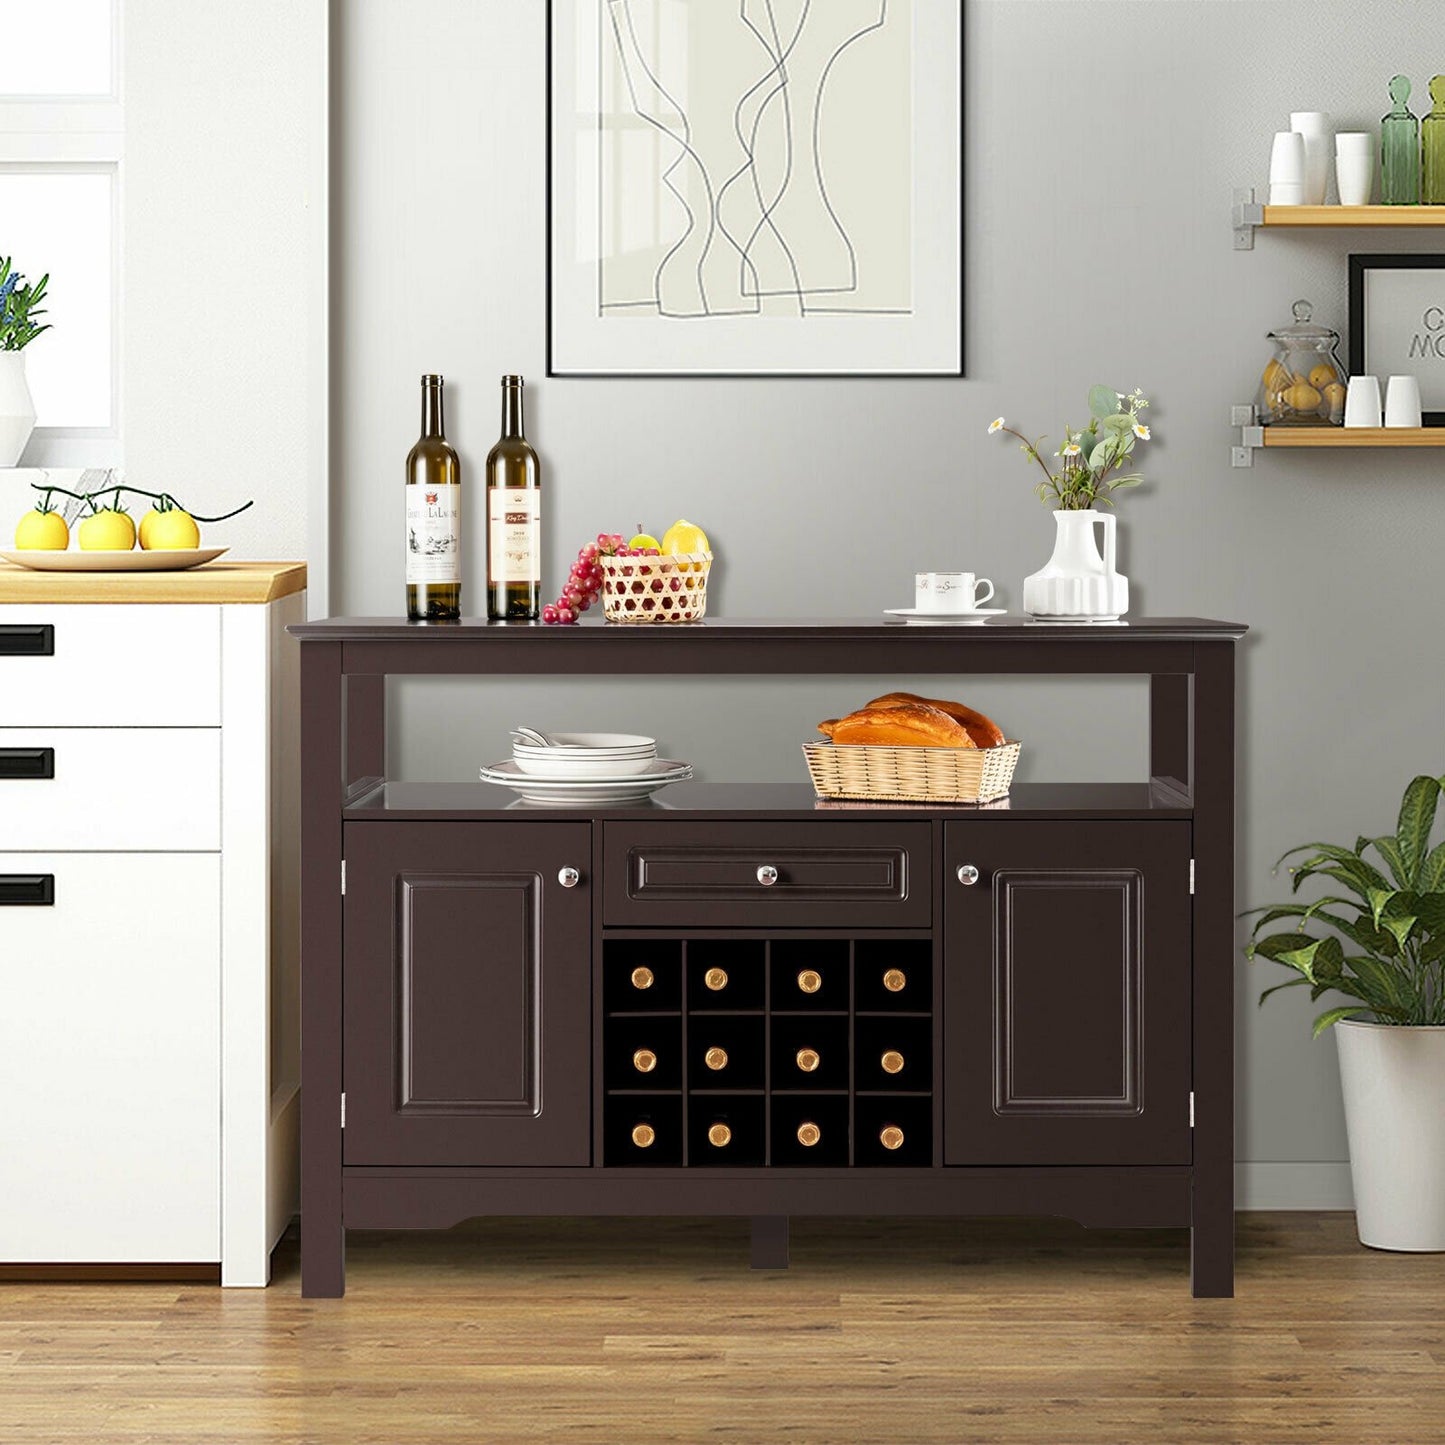 Elegant Classical Multifunctional Wooden Wine Cabinet Table Brown, Brown - Gallery Canada